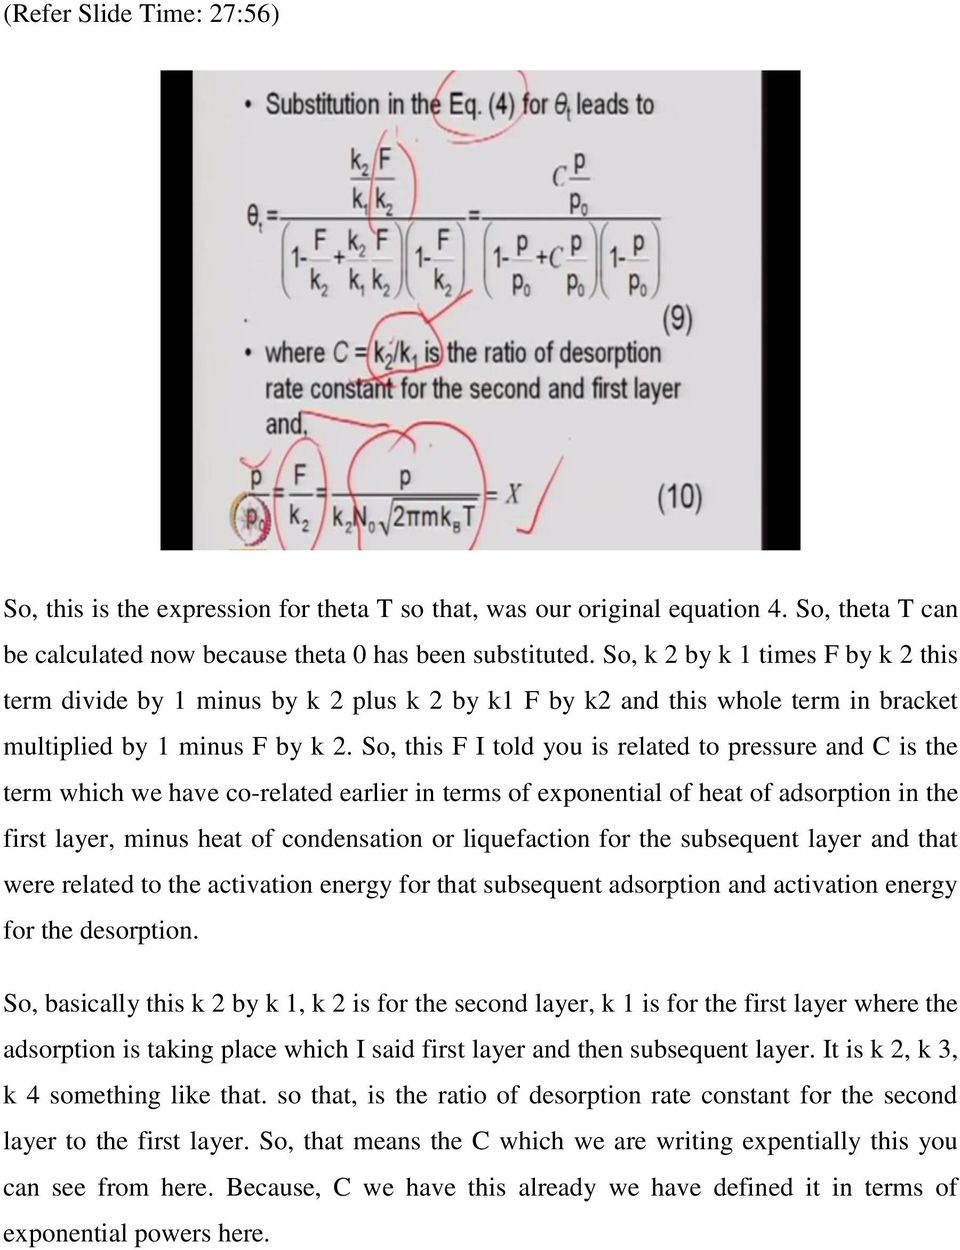 So, this F I told you is related to pressure and C is the term which we have co-related earlier in terms of exponential of heat of adsorption in the first layer, minus heat of condensation or